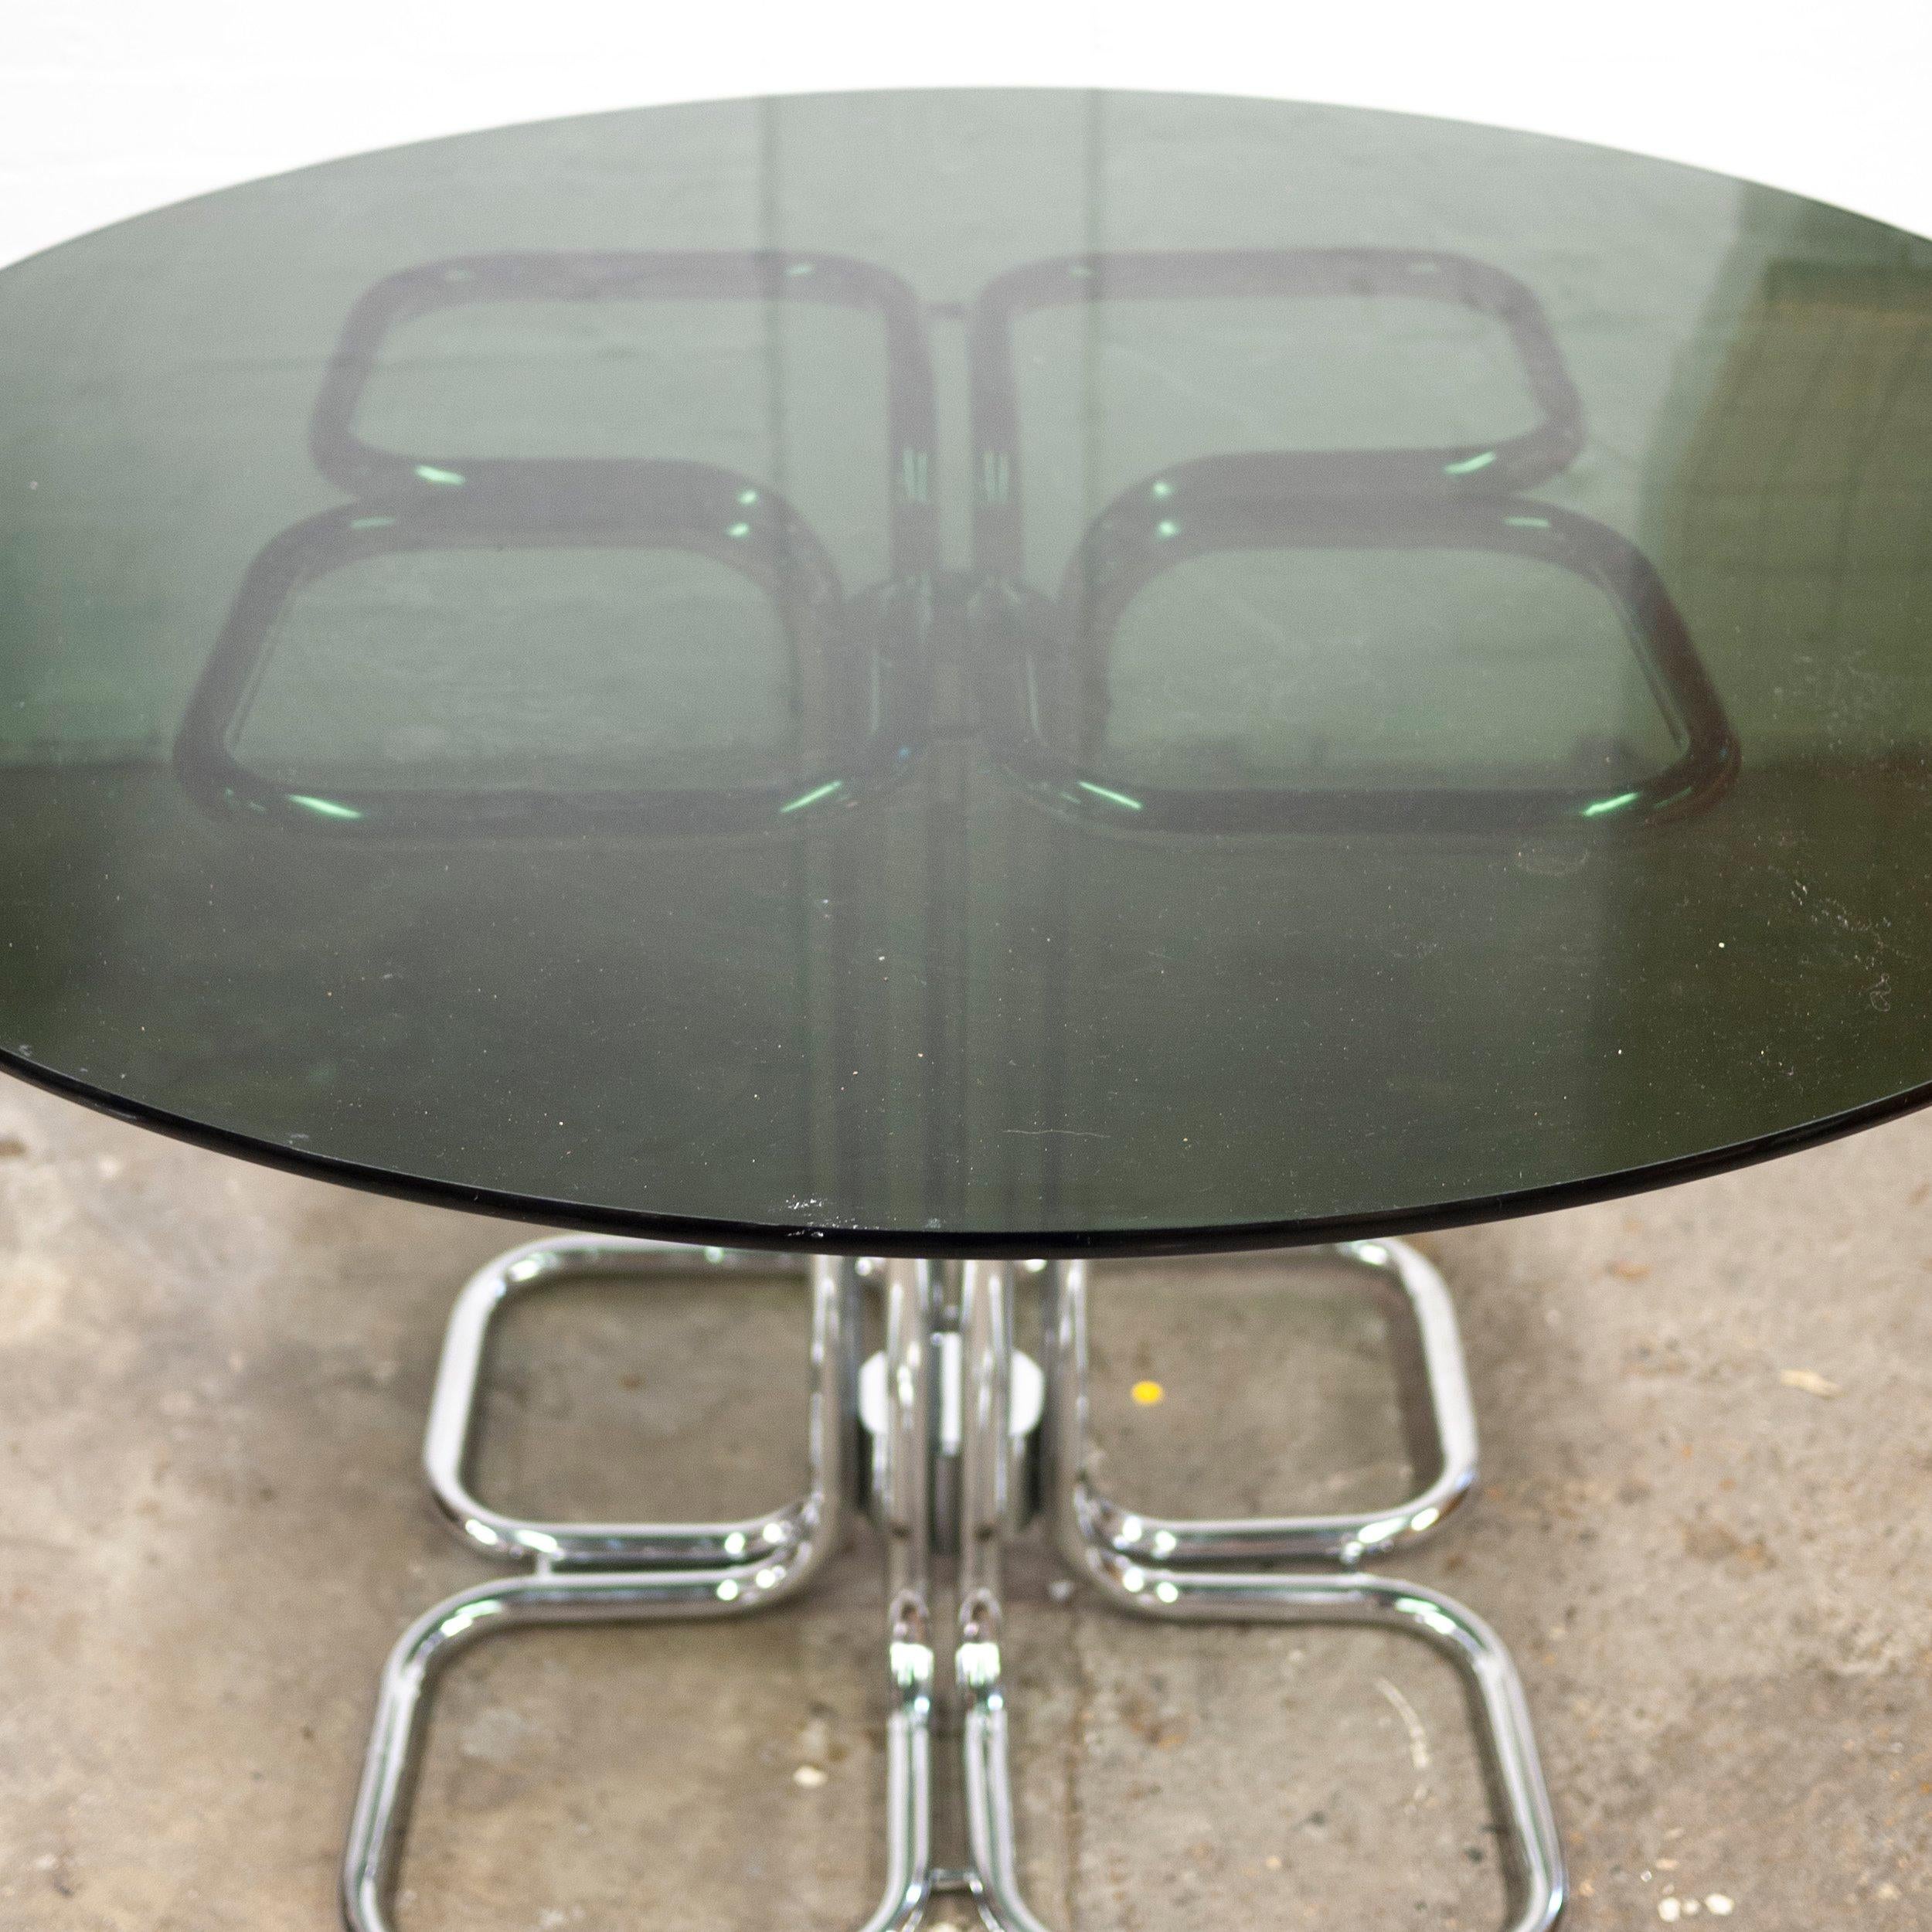 A glass and tubular metal dining table with a pedestal base in the style of hollywood regency.

Designer - Giotto Stoppino

Design Period - 1970 to 1979

Style - Hollywood Regency

Detailed Condition - Good with minimal defects.

Restoration and